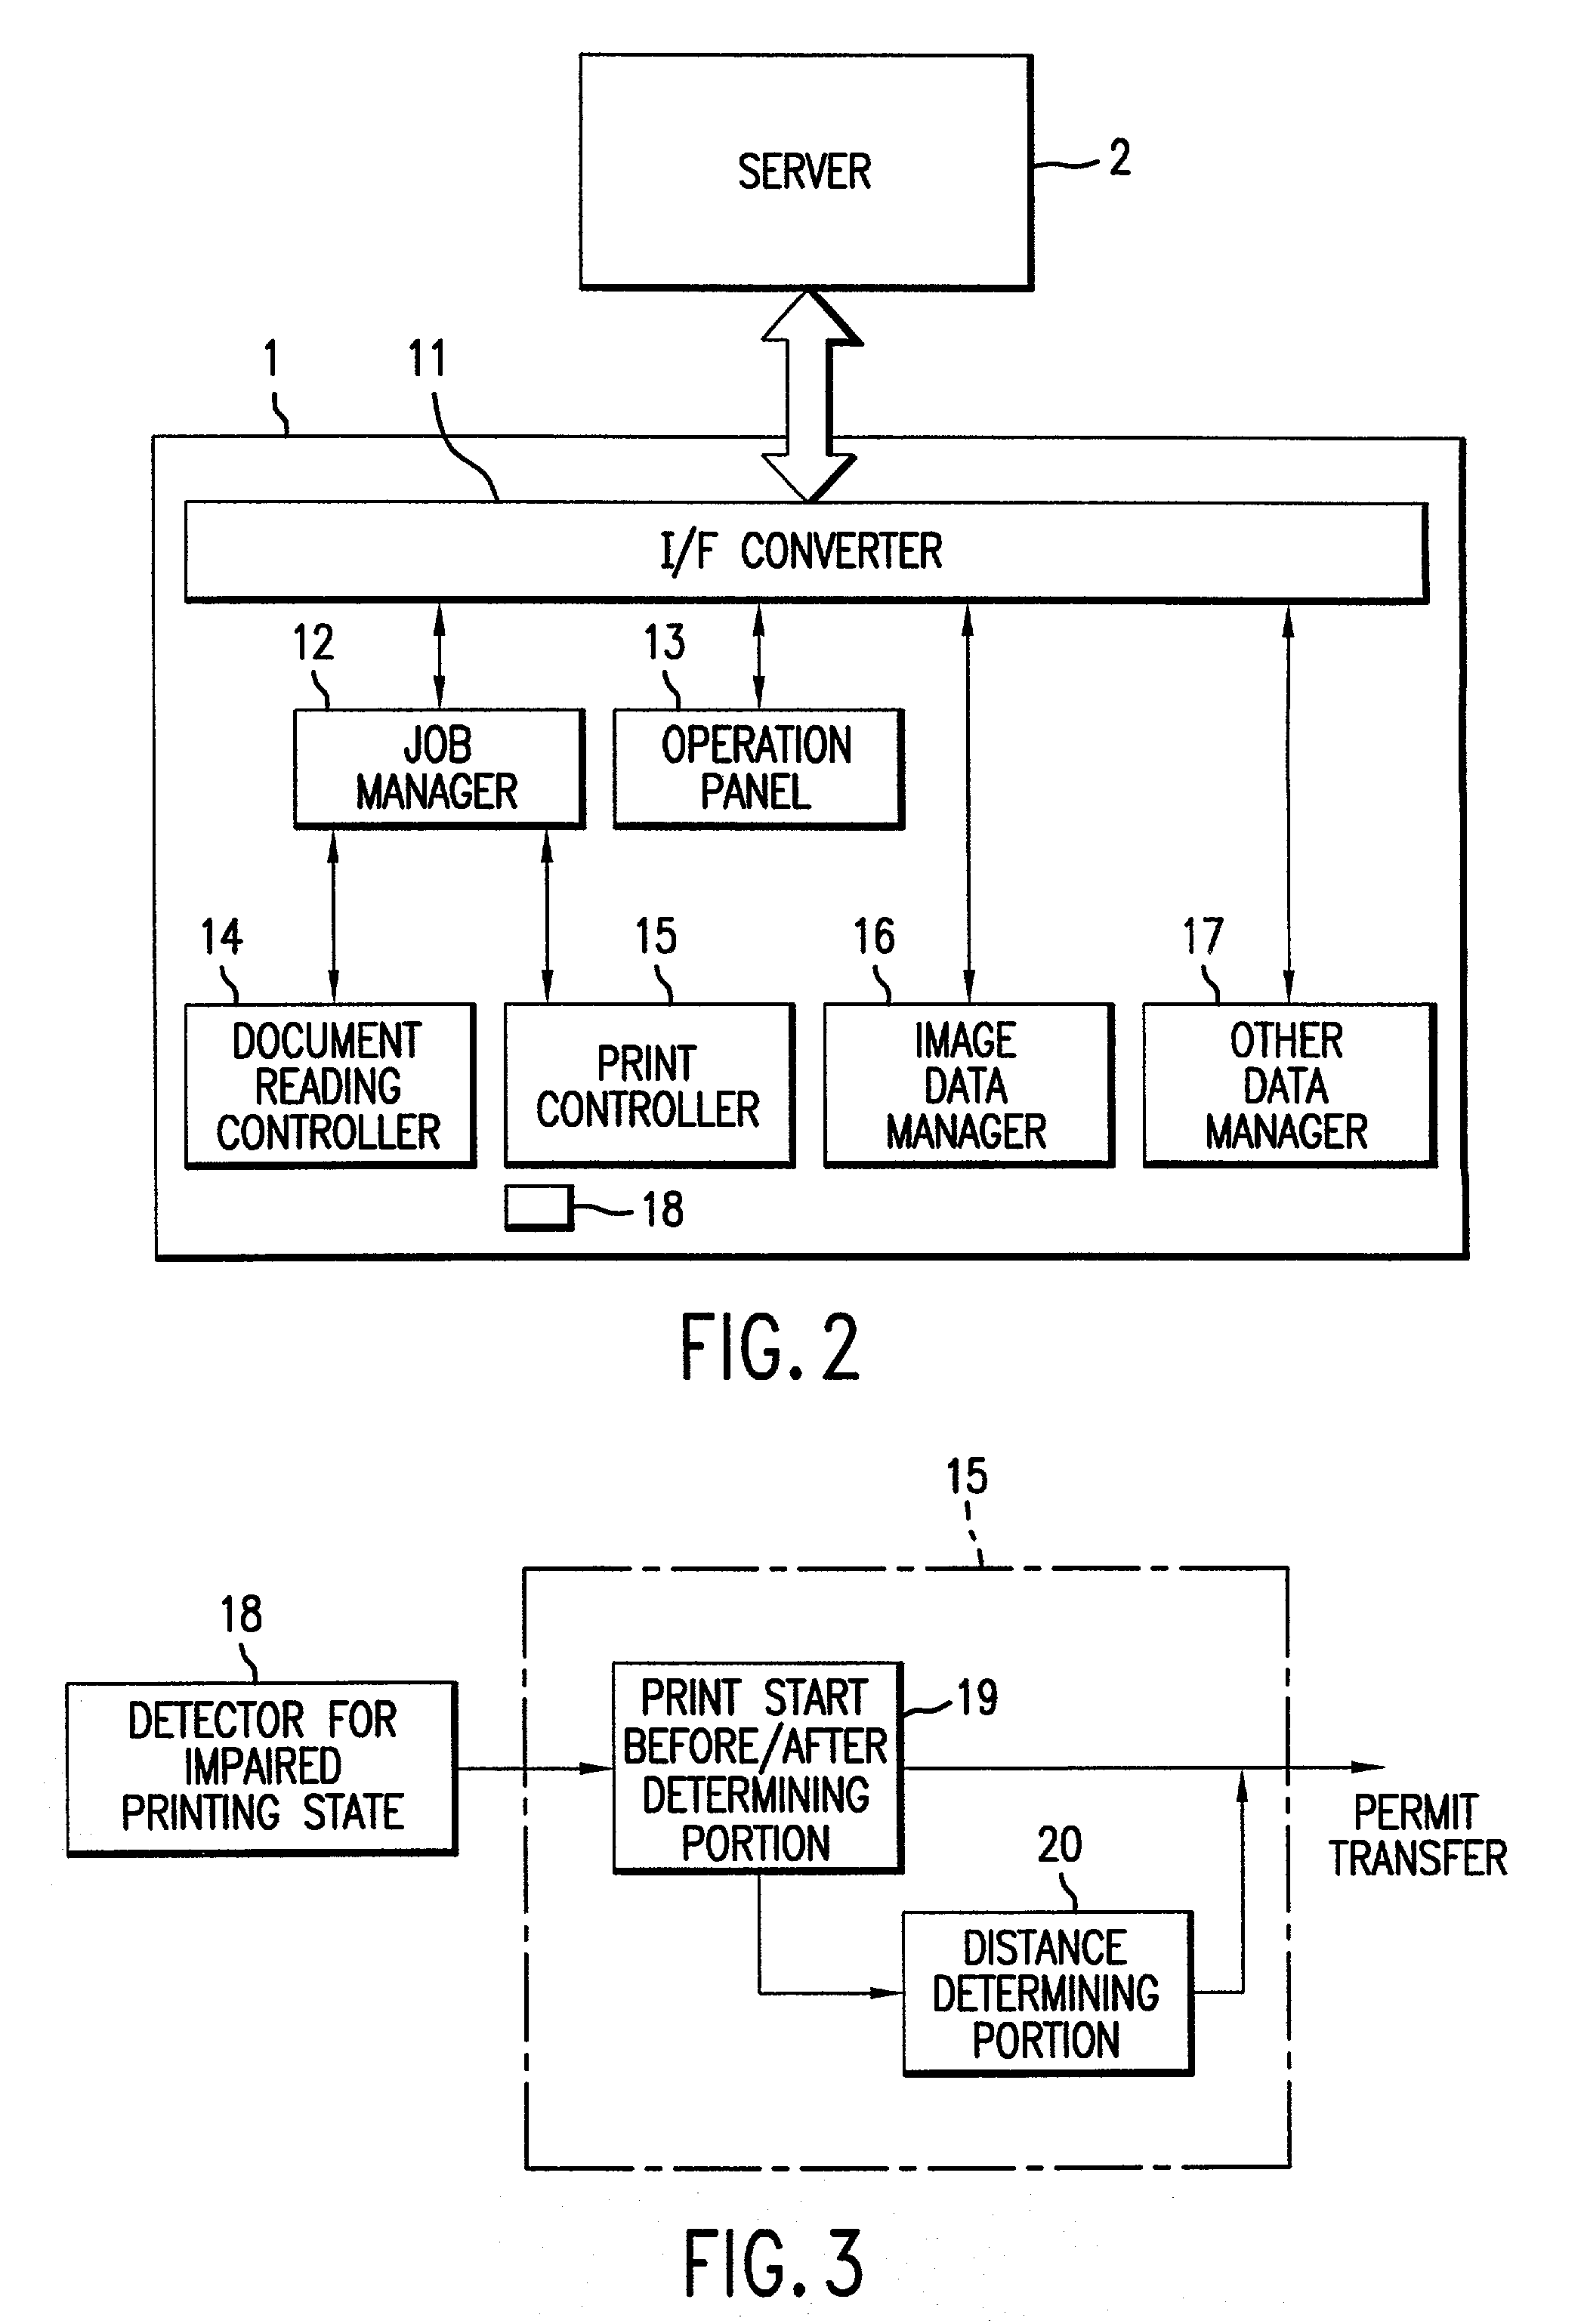 Image forming system and image forming apparatus for transferring job data when an impaired image forming state is detected